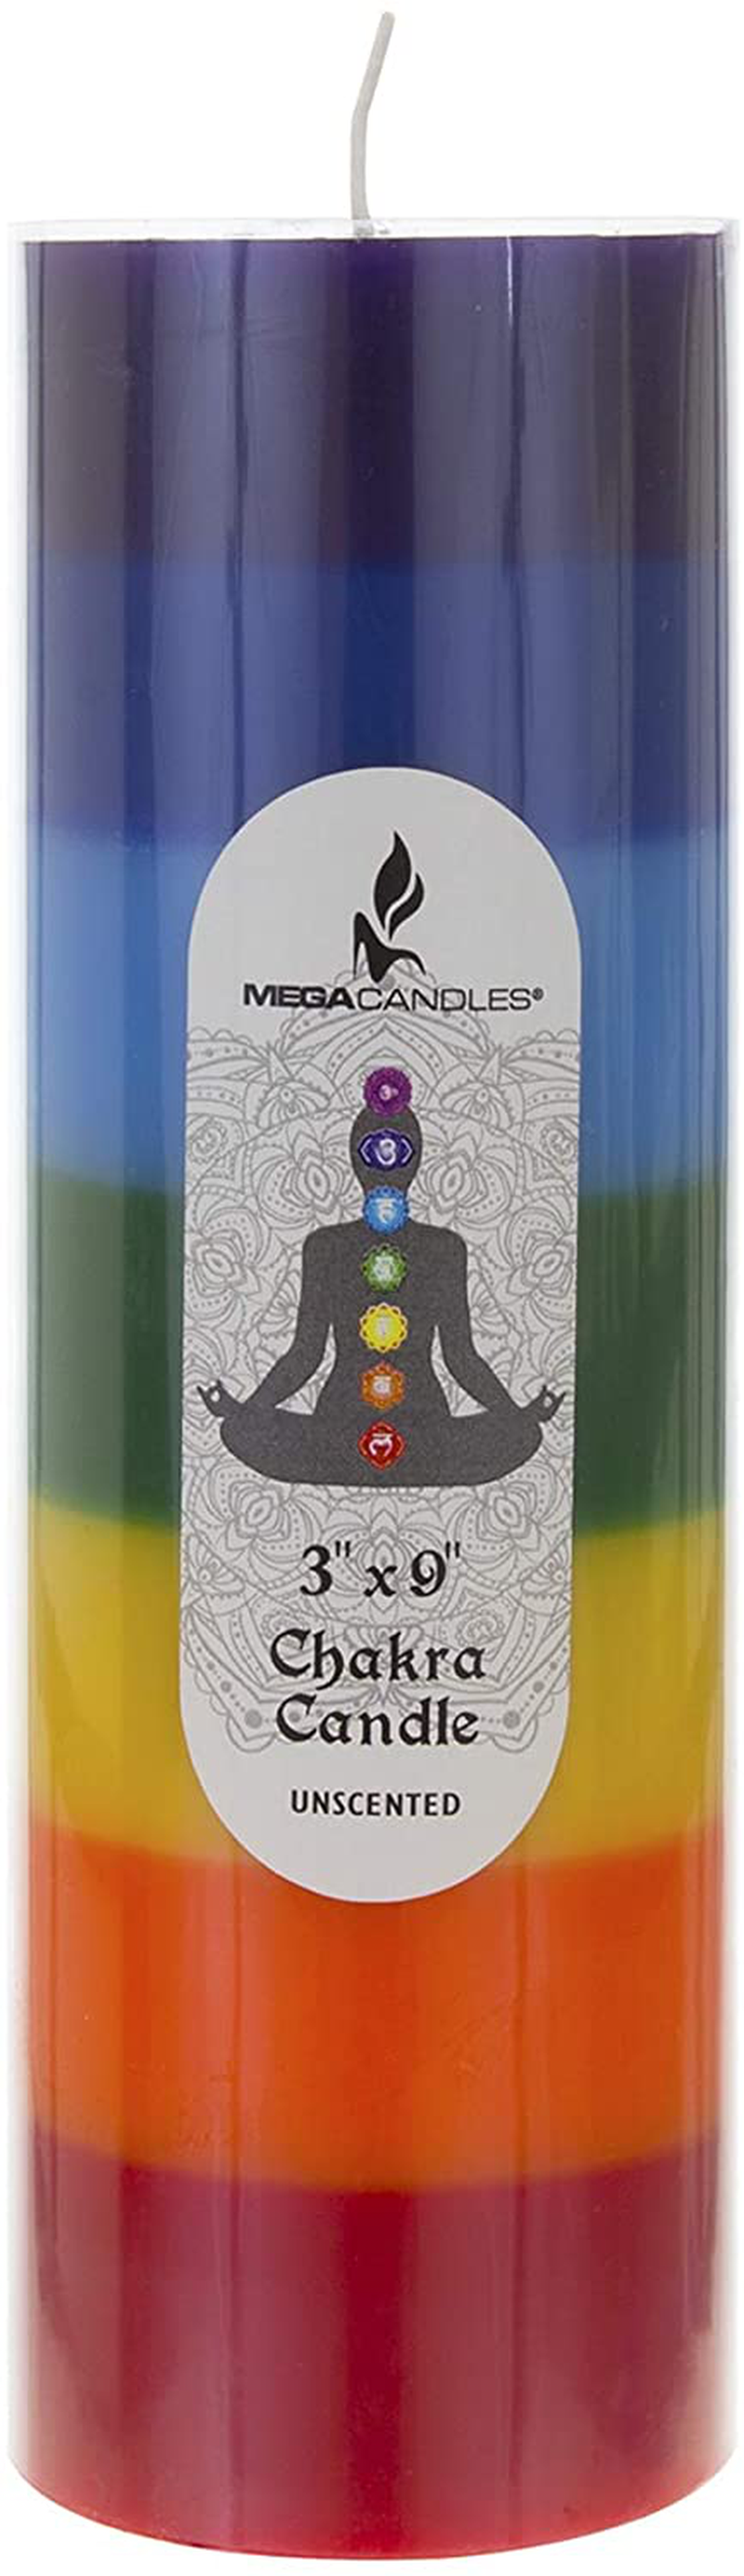 Mega Candles Unscented Multi Color Chakra Round Pillar Candle, Hand Poured Premium Wax Candles 3 Inch x 9 Inch, Cotton Wick, Promotes Positive Energy, Aids Meditation, Relaxation & More Home & Garden > Decor > Home Fragrances > Candles Mega Candles 1 3" x 9" Round 